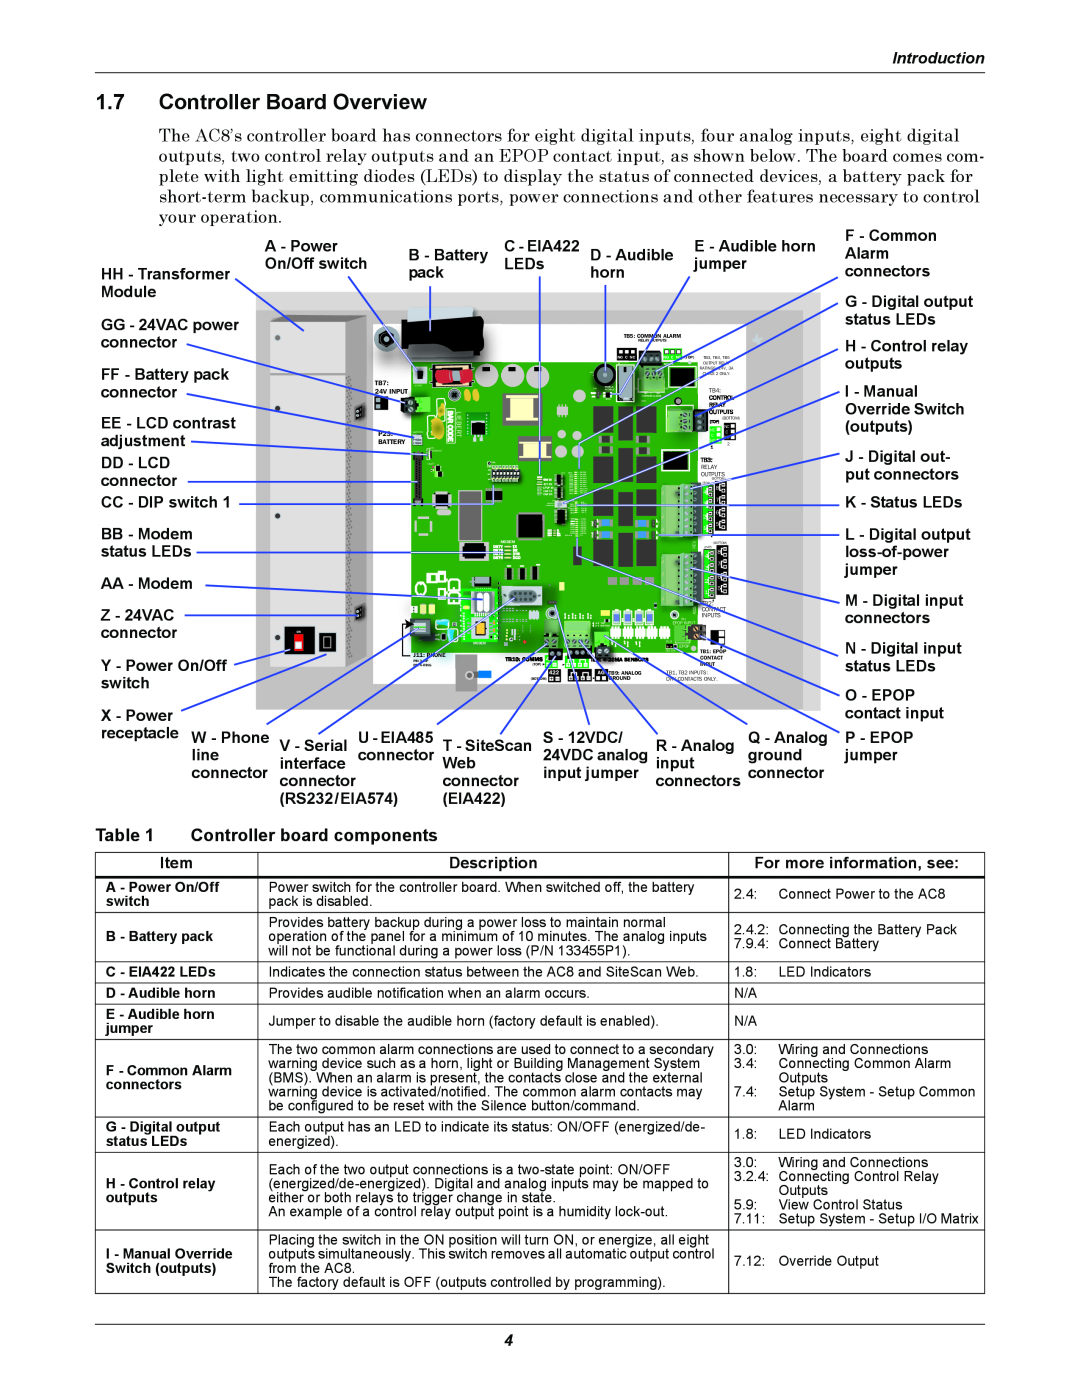 Emerson AC8 user manual 1.7Controller Board Overview, Table, Controller board components, Introduction 